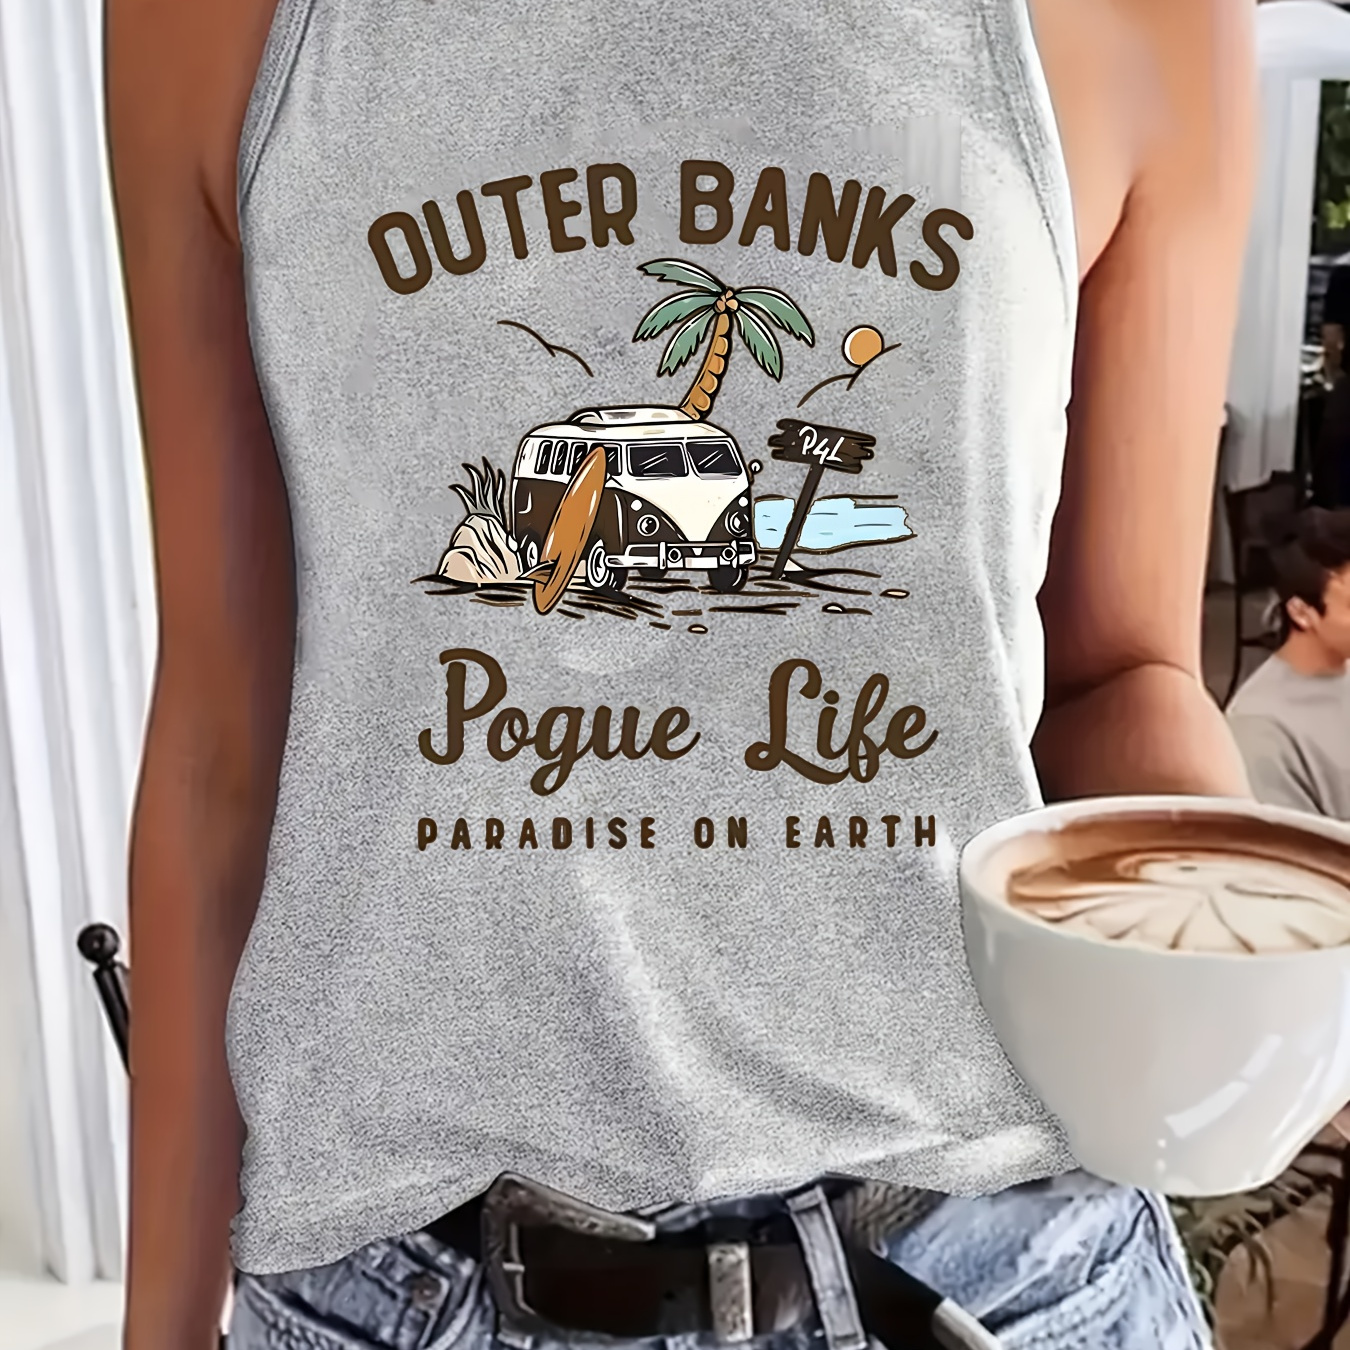 

Women's Sleeveless Tank Top, Outer Banks Pogue Life Print, Casual Grey Sporty Vest, Comfortable Breathable Summer Tee, Beach & Outdoor Wear